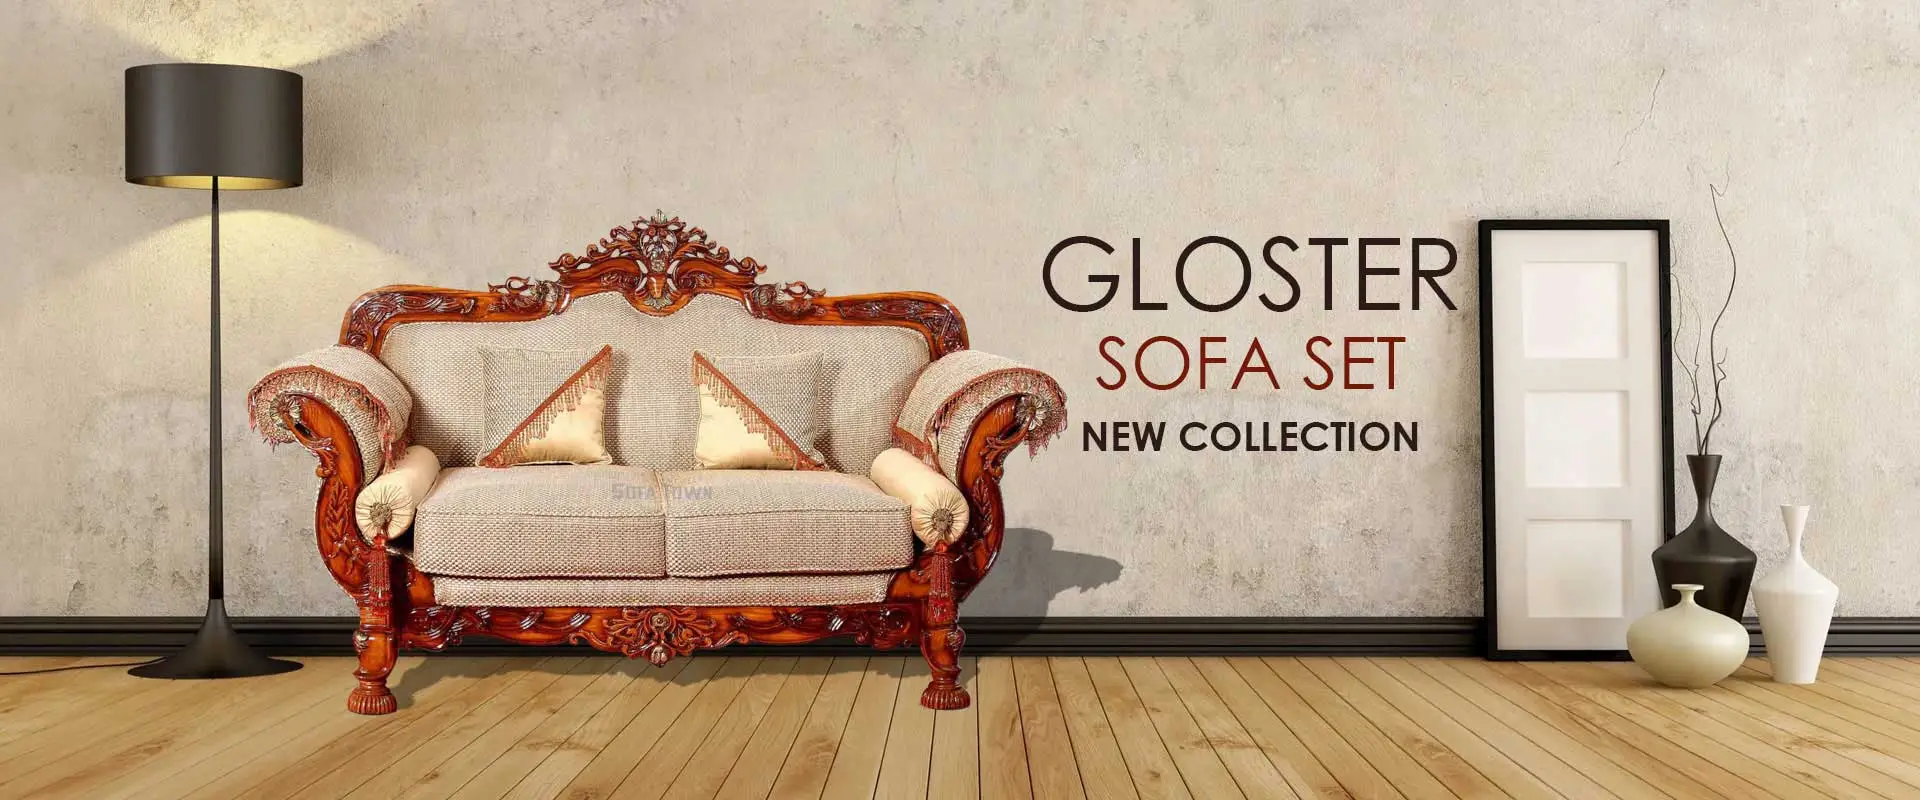 Gloster Sofa Set  Manufacturers in Sheopur